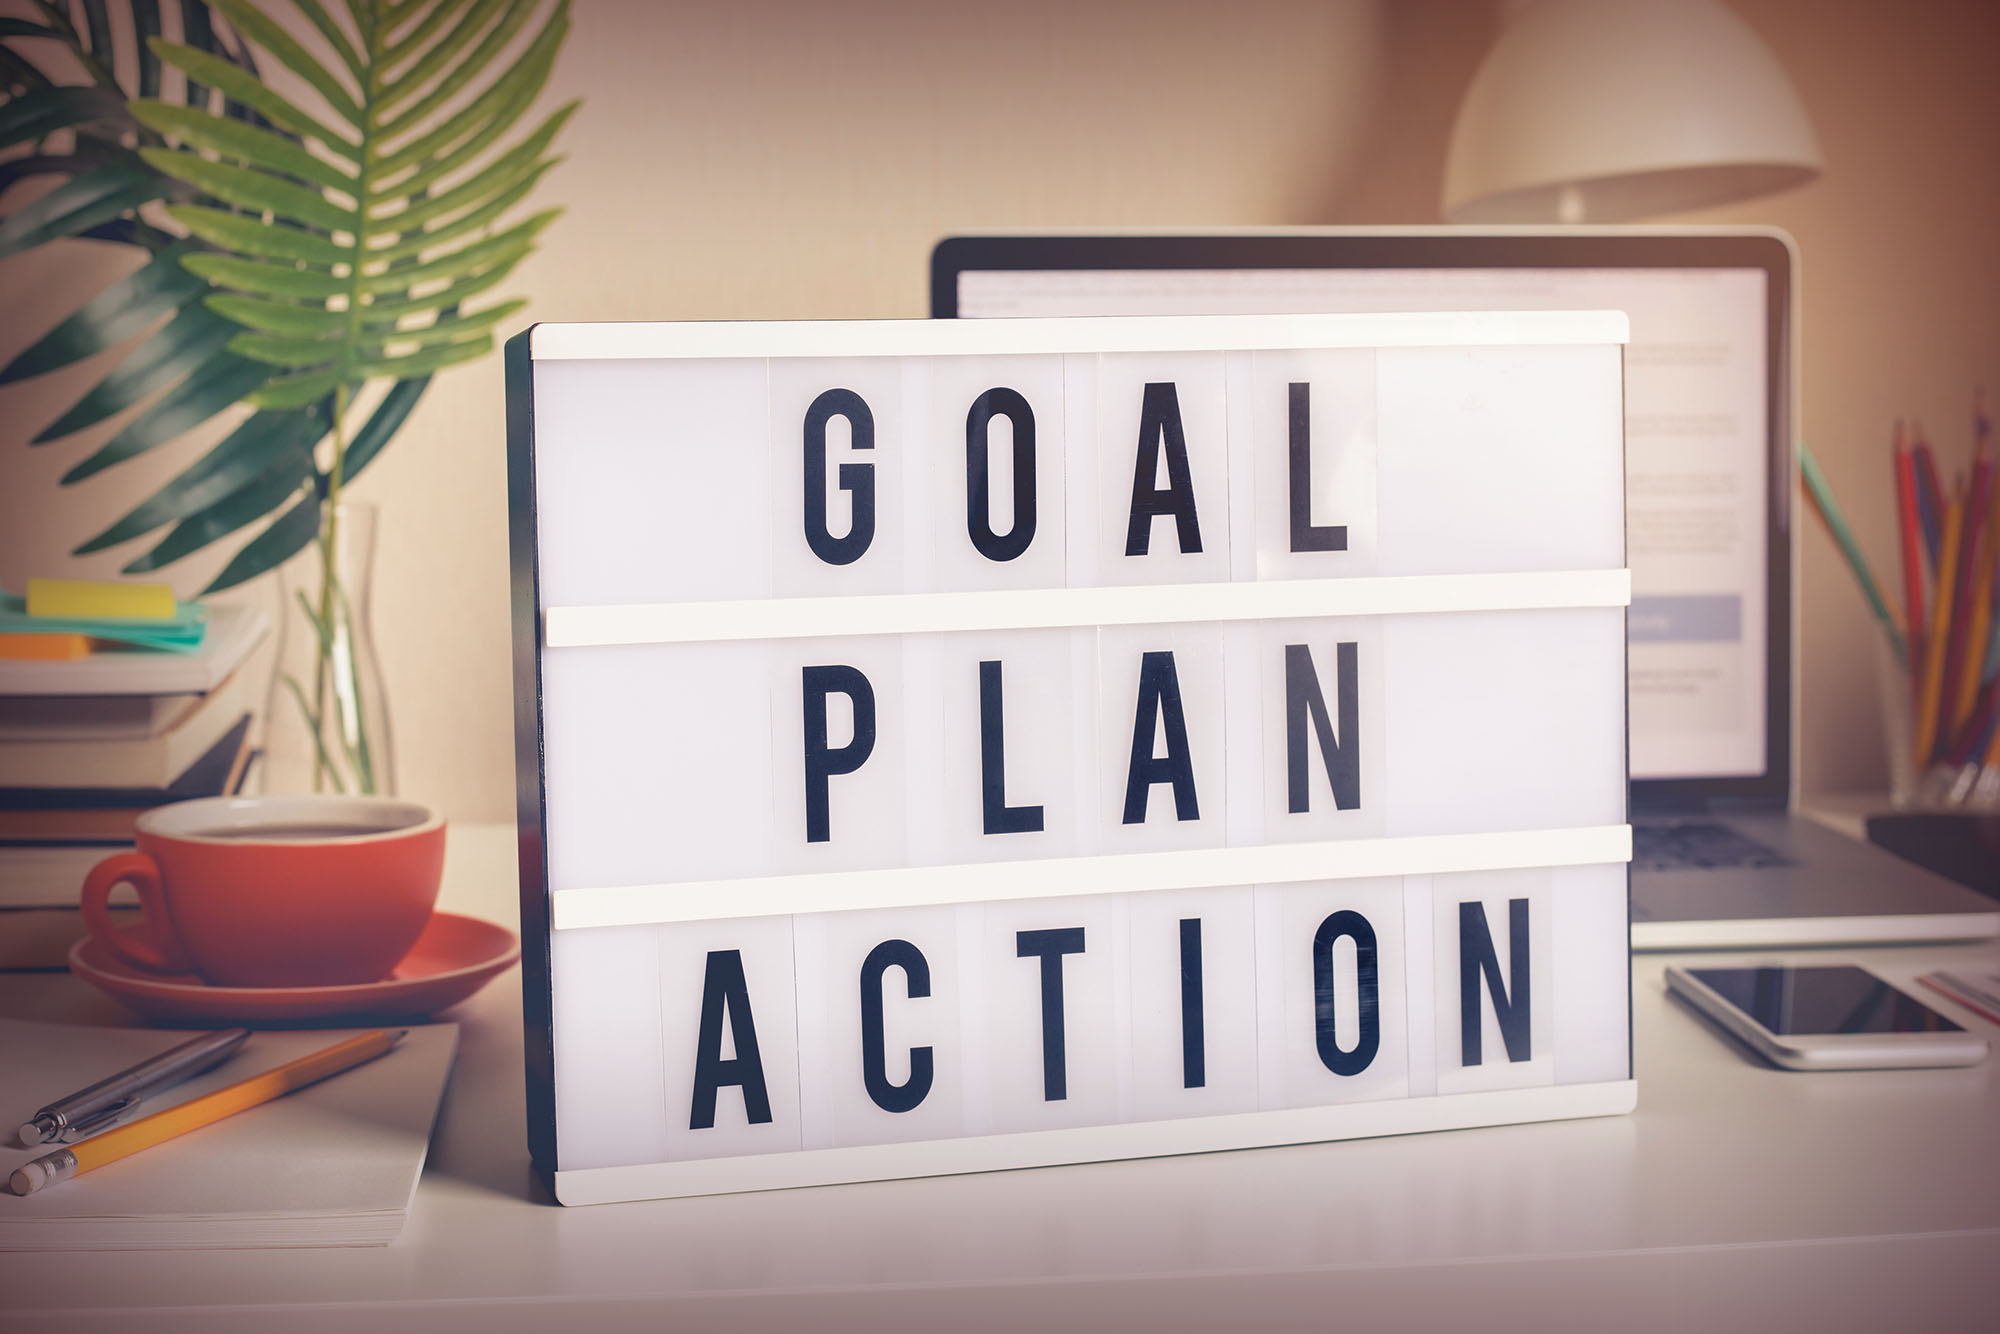 Premier Medical Group - New Years Resolutions - Goal. Plan. Action